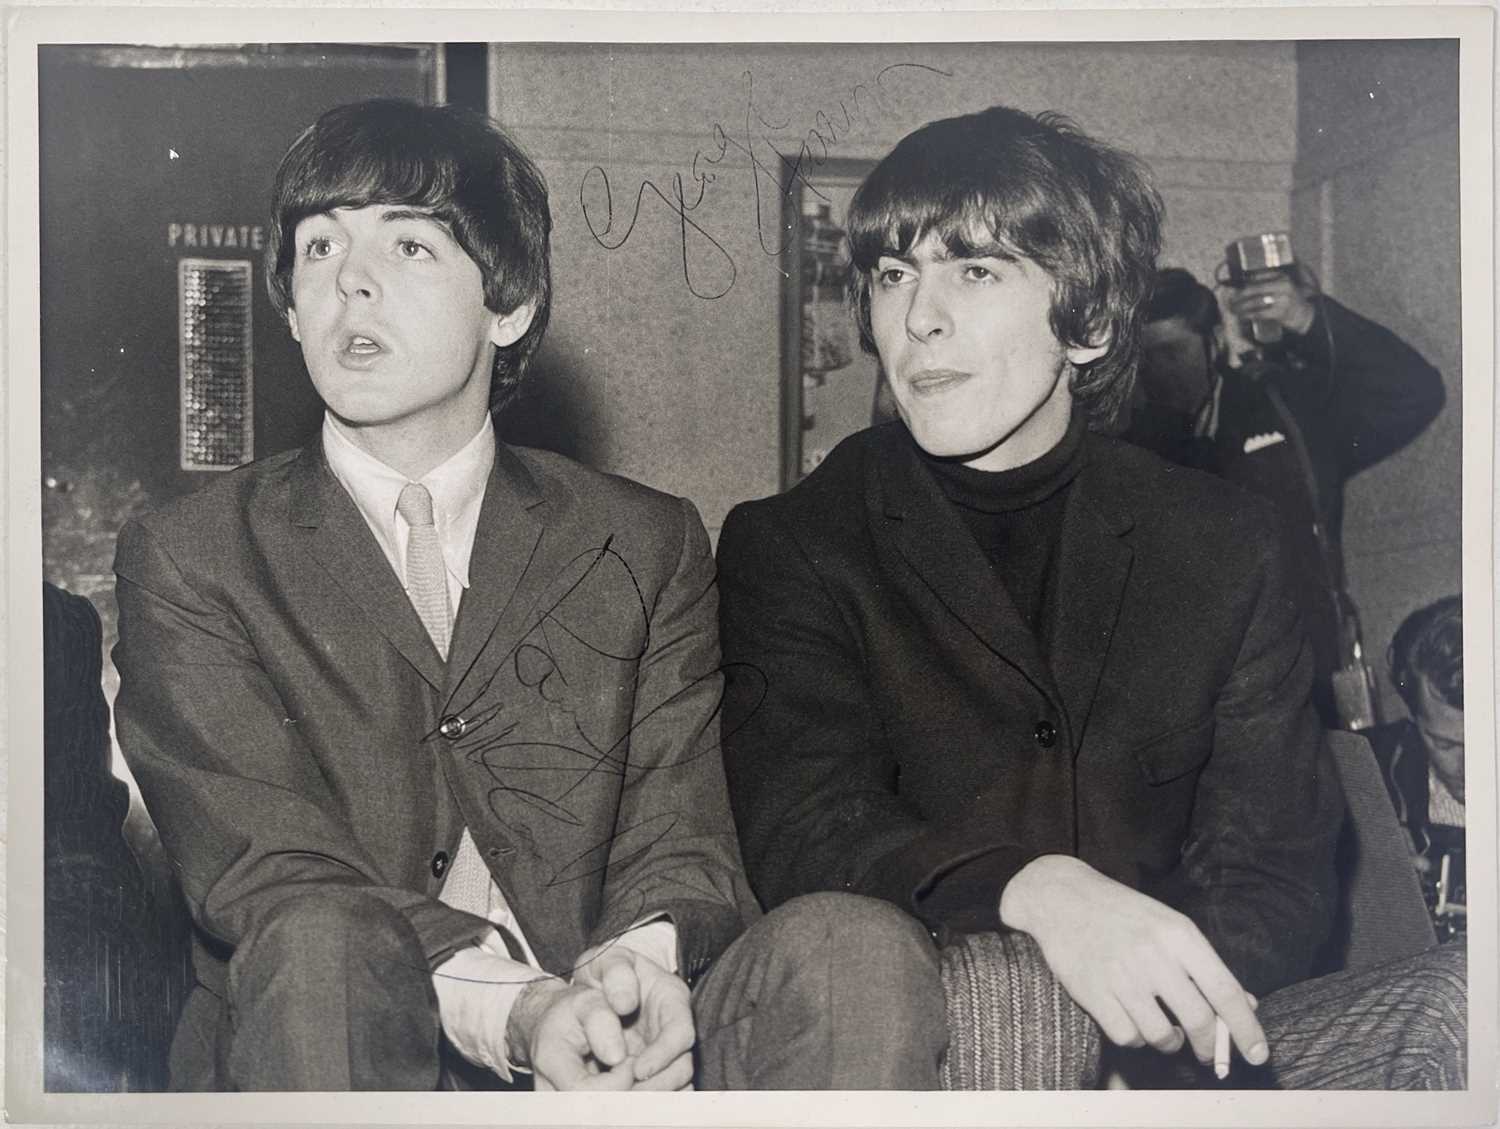 Lot 362 - PAUL MCCARTNEY & GEORGE HARRISON - CAIRD HALL, DUNDEE 1964 SIGNED PHOTOGRAPH